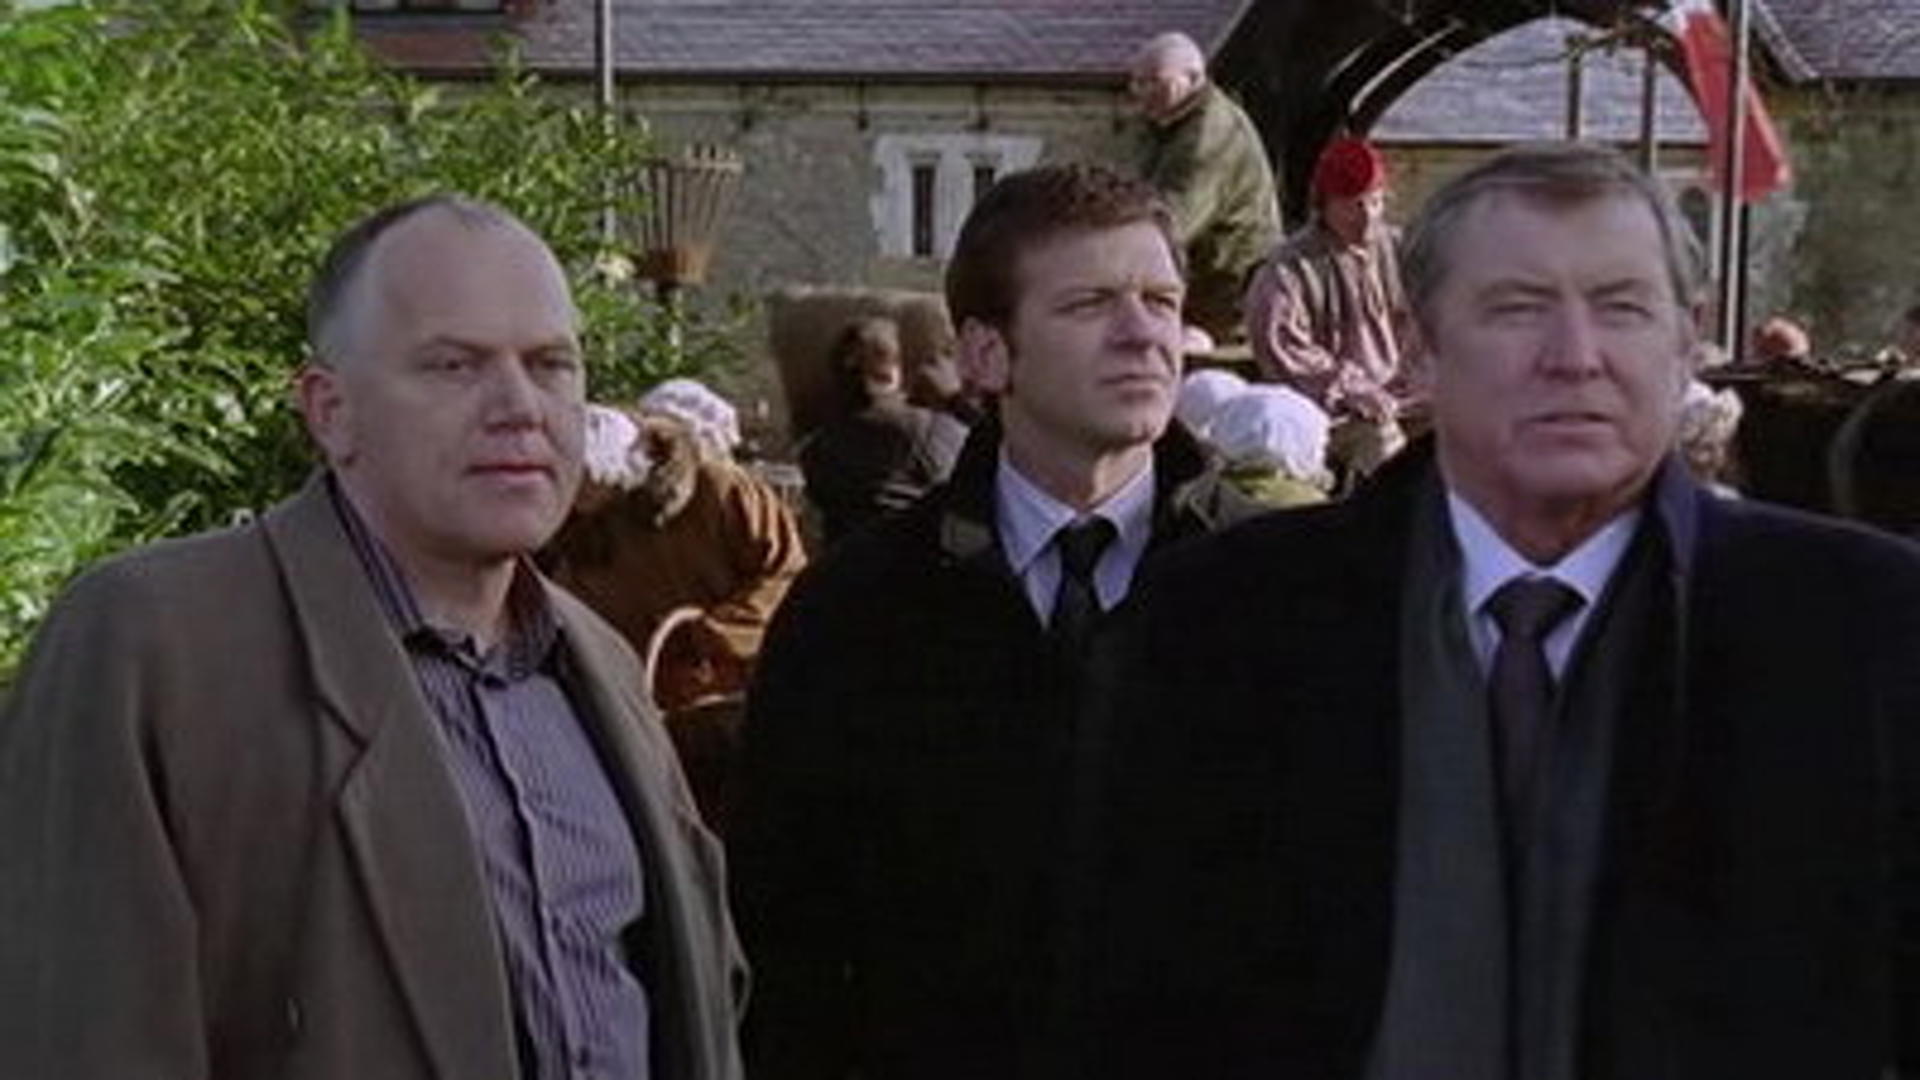 Midsomer Murders S10e07 They Seek Him Here Summary Season 10 Episode 7 Guide